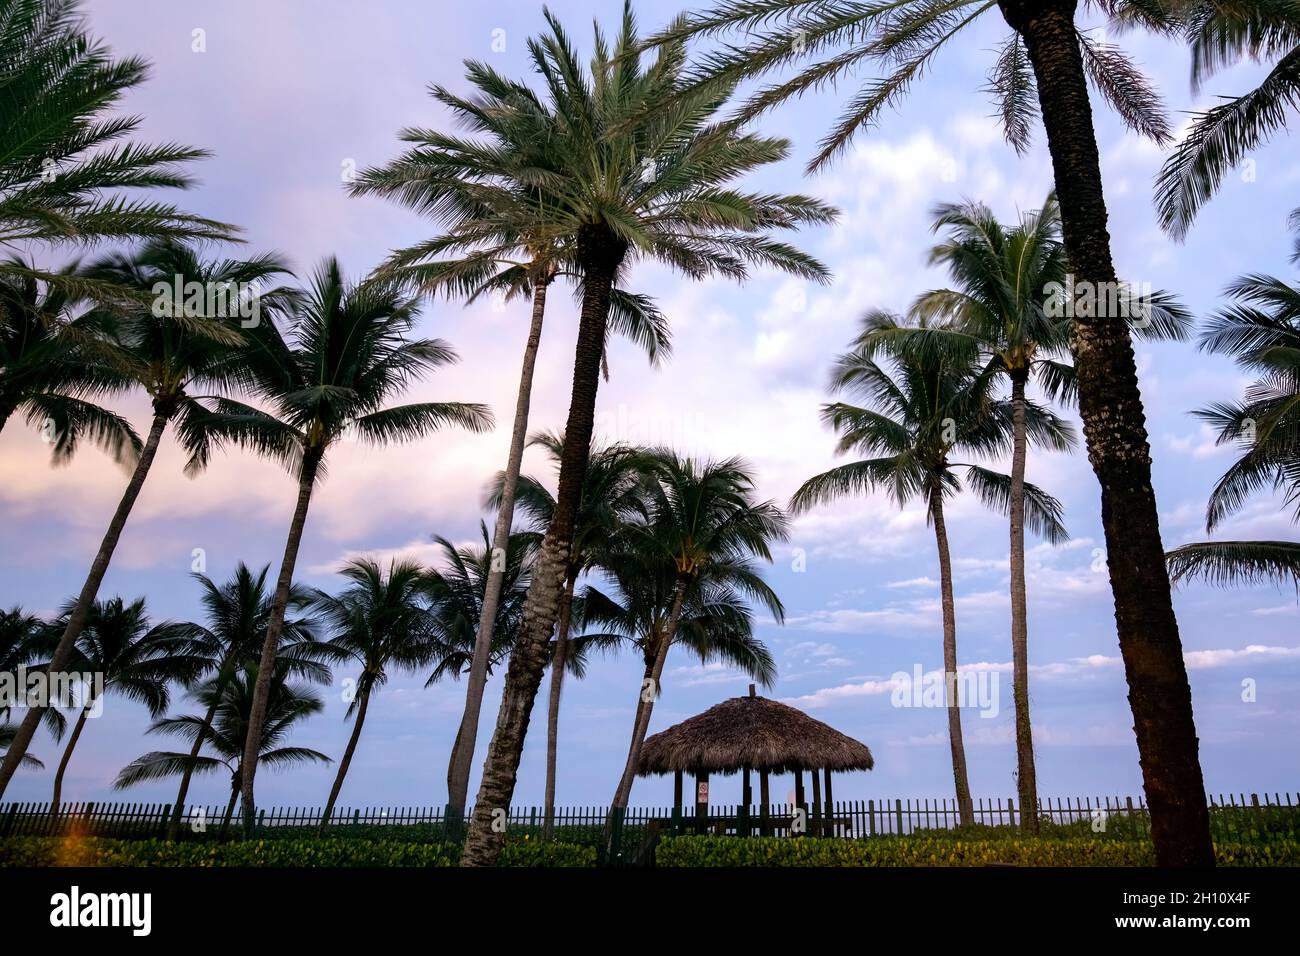 Palm trees in cool blue sky after sunset - Lauderdale-by-the-Sea, Florida, USA Stock Photo